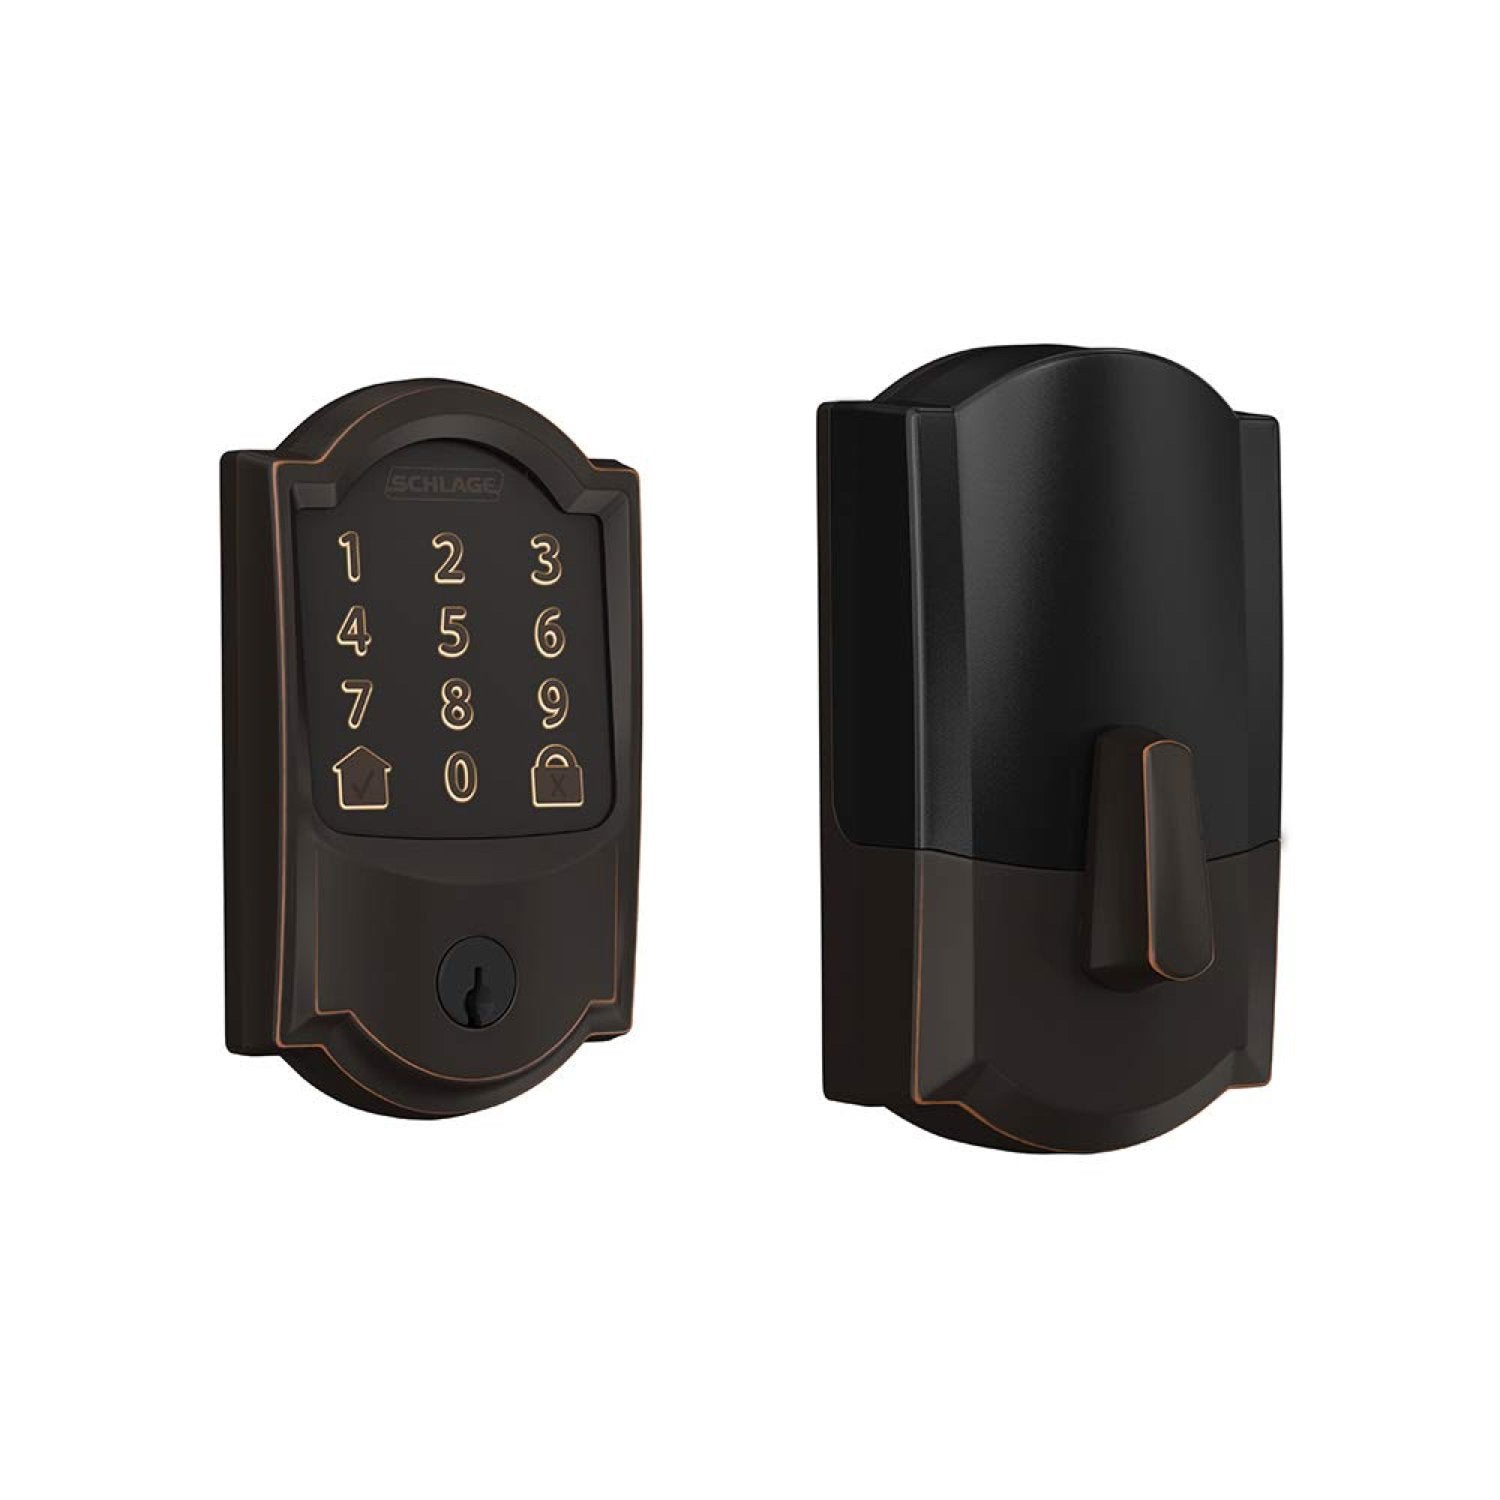 Schlage Encode Smart WiFi Deadbolt with Camelot Trim (for Works with Ring Video Doorbells and Cameras) - Aged Bronze:Schlage Encode Smart WiFi Deadbolt with Camelot Trim (for Works with Ring Video Doorbells and Cameras)